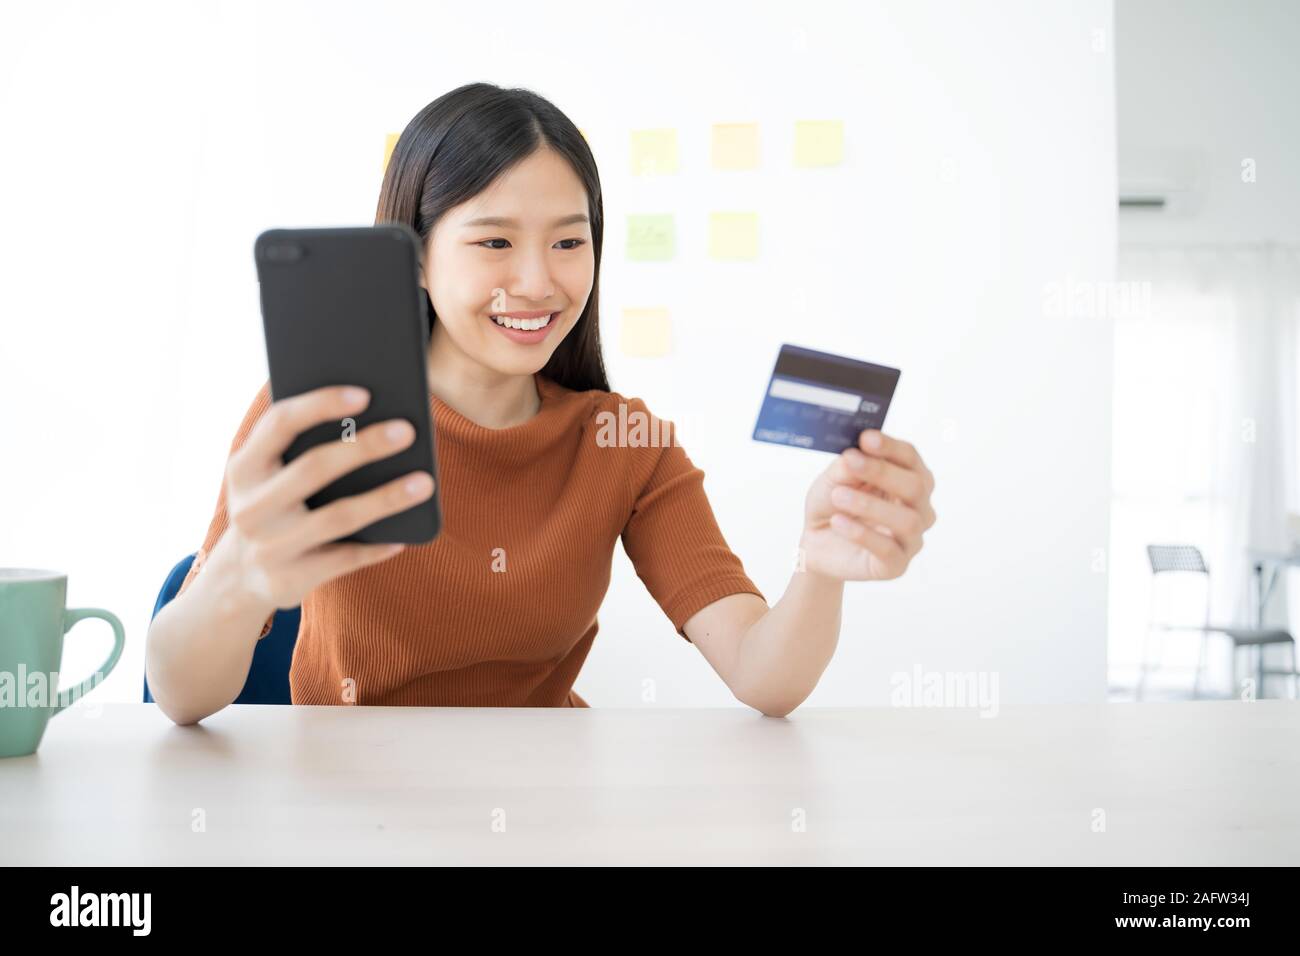 Young Asian woman using smartphone and credit card. Shopping buying online Stock Photo